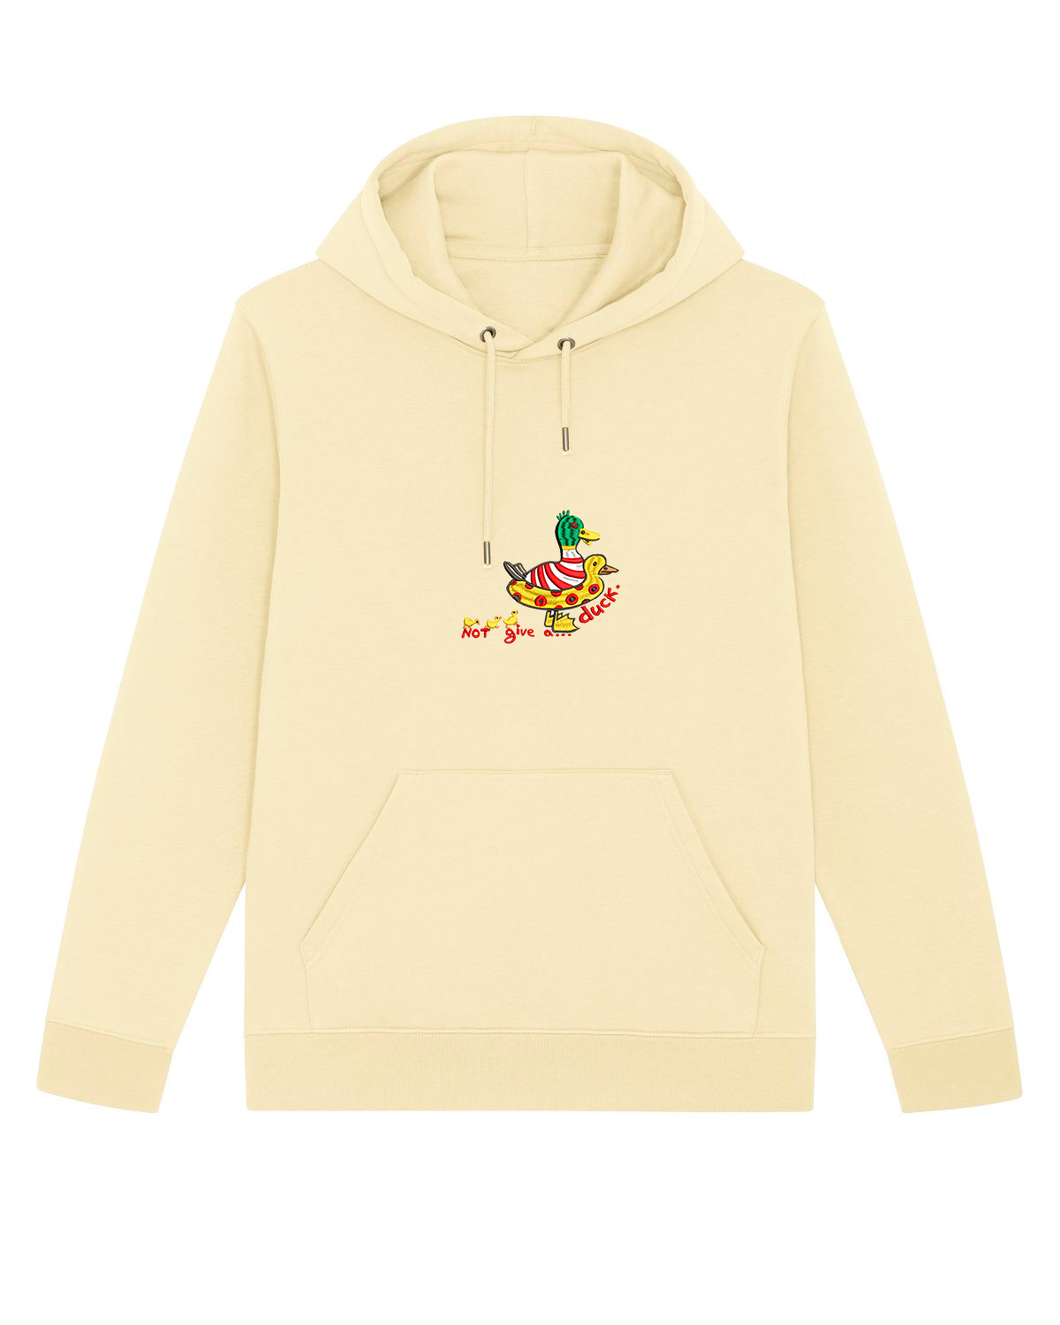 Not give a...duck. - Embroidered UNISEX hoodie